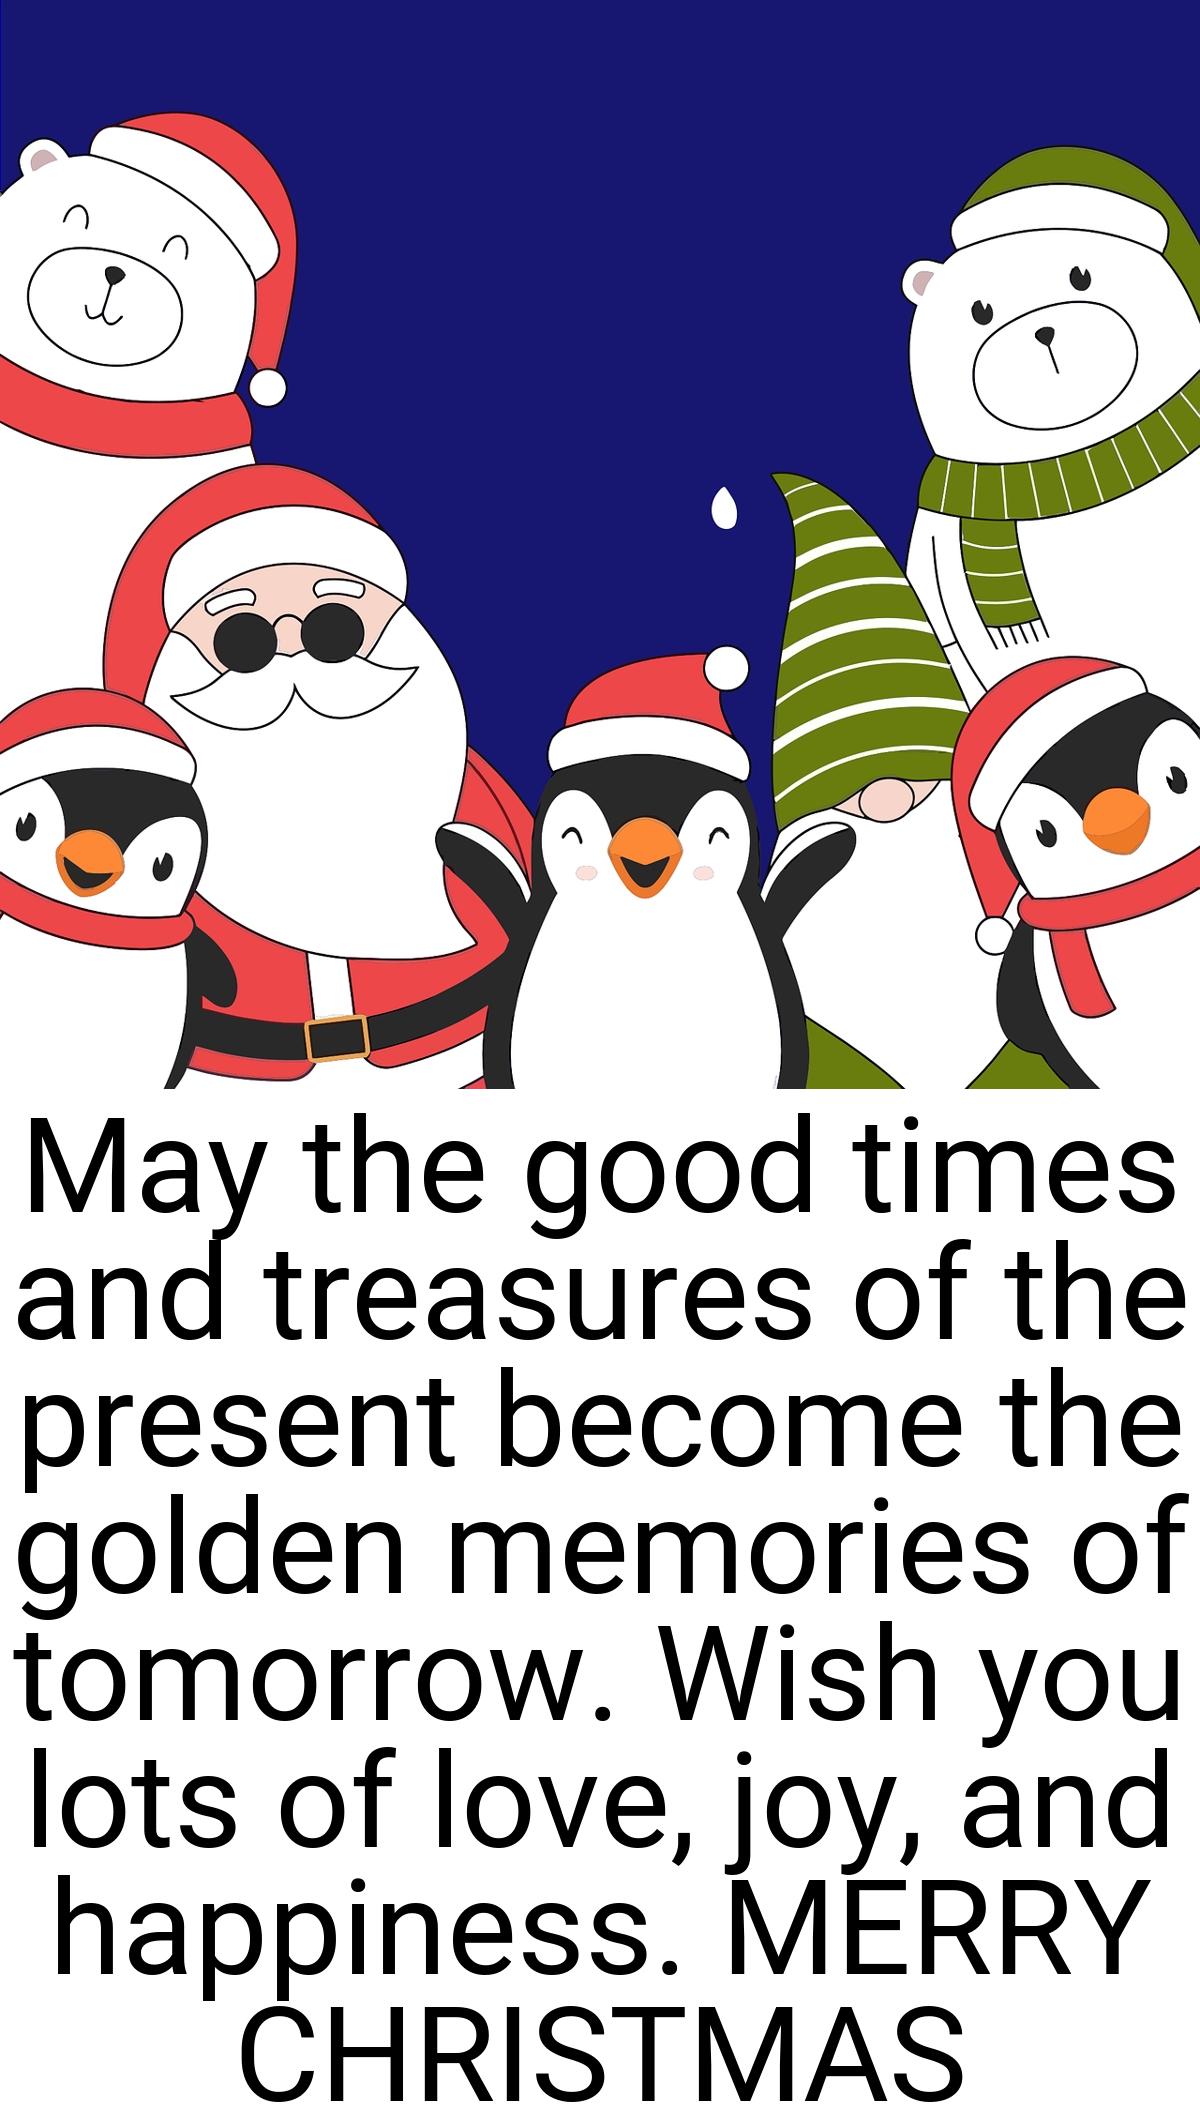 May the good times and treasures of the present become the